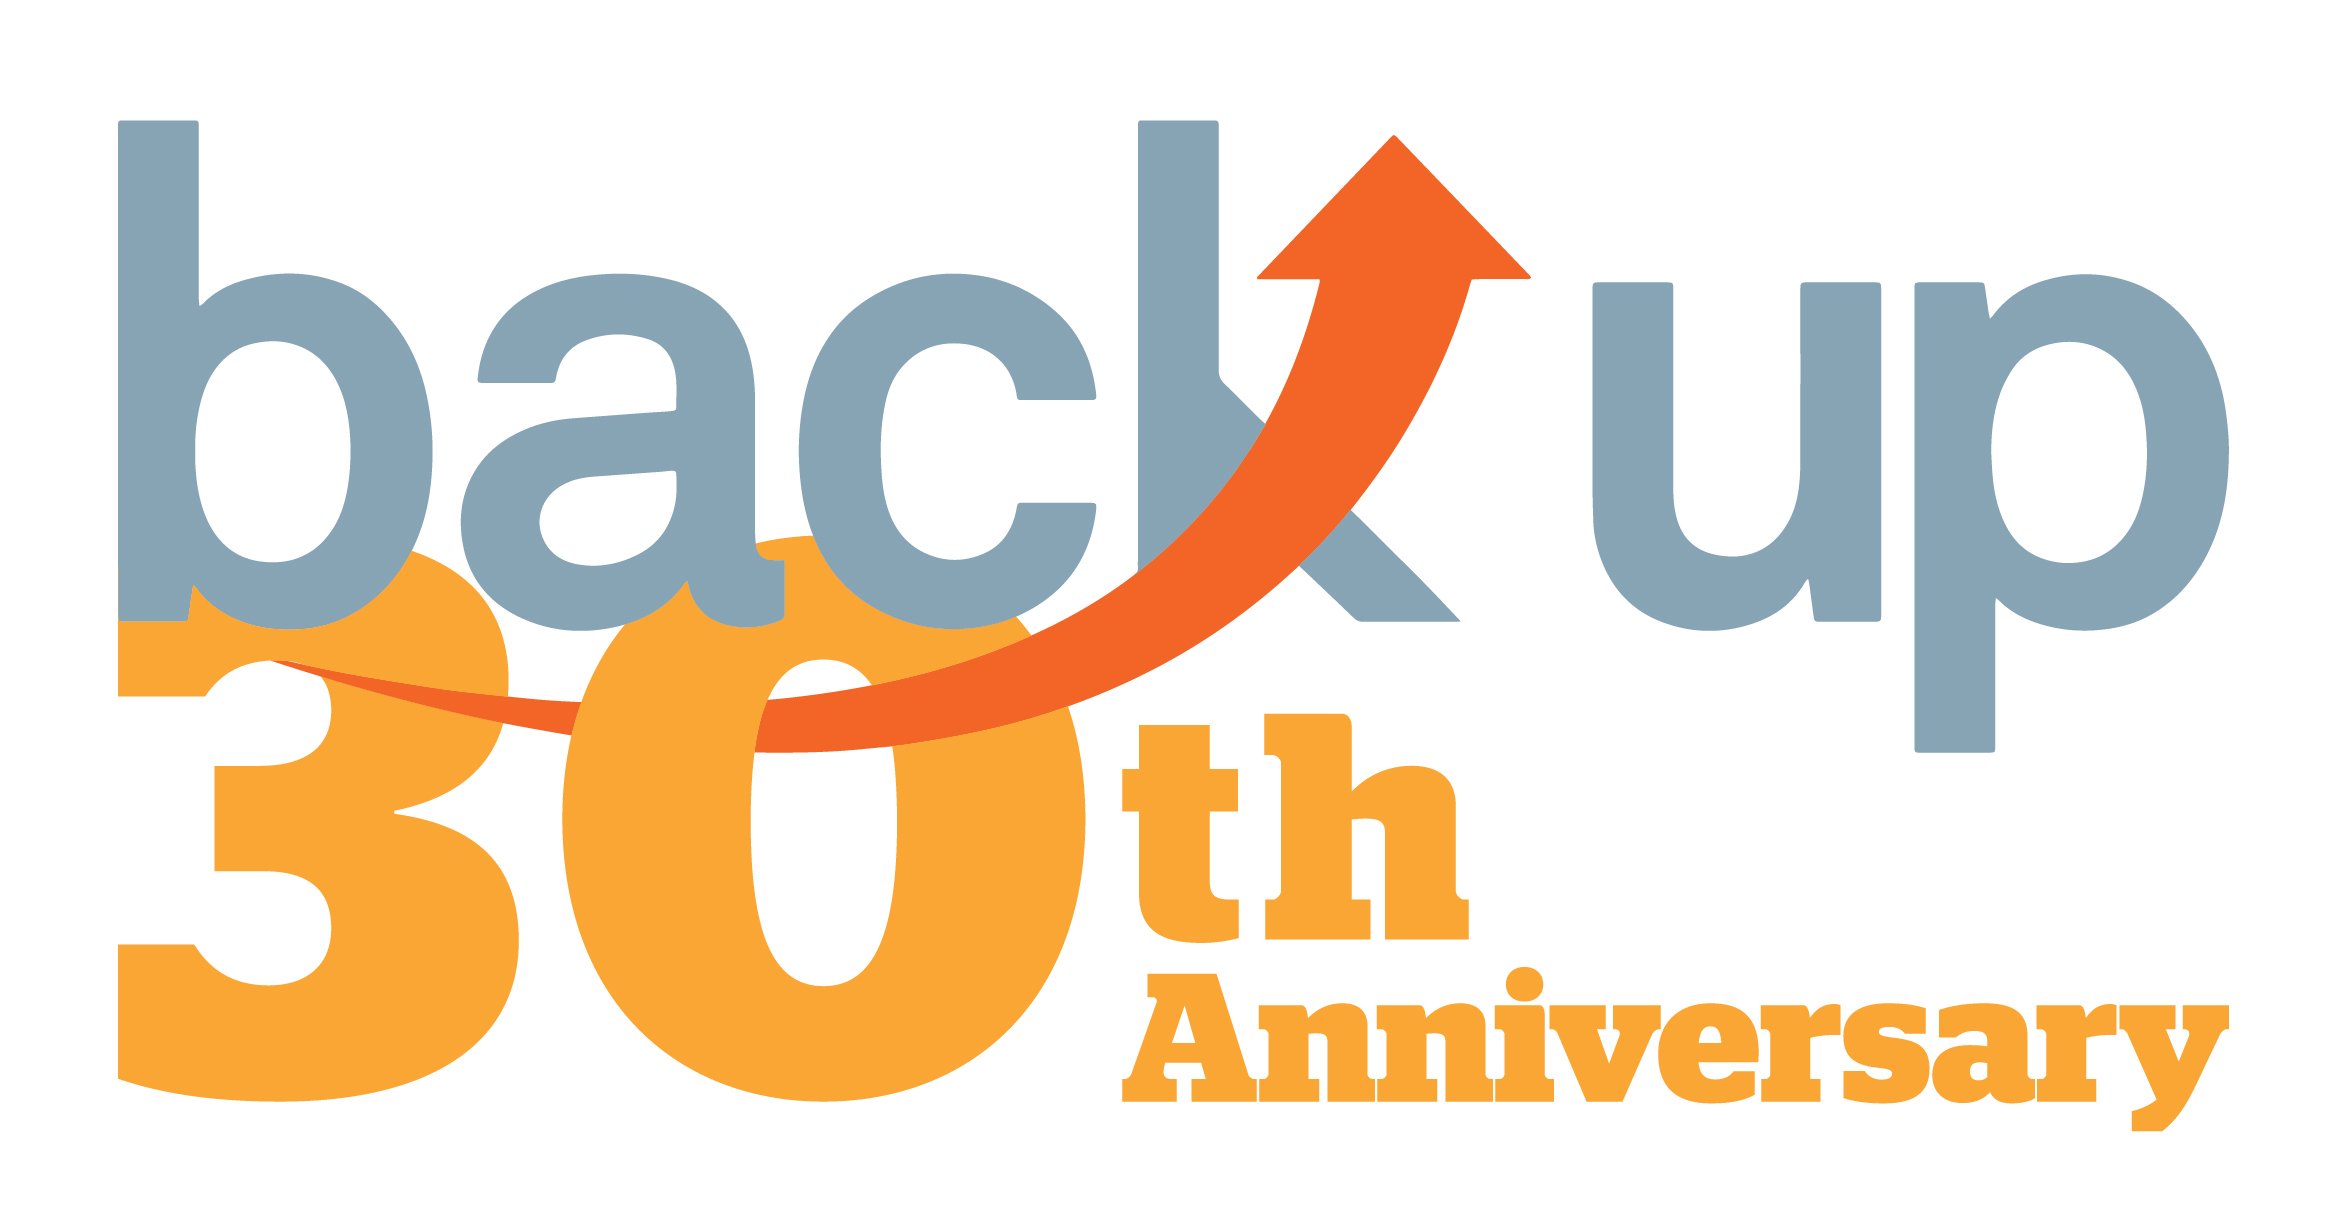 Back Up - 30th Anniversary